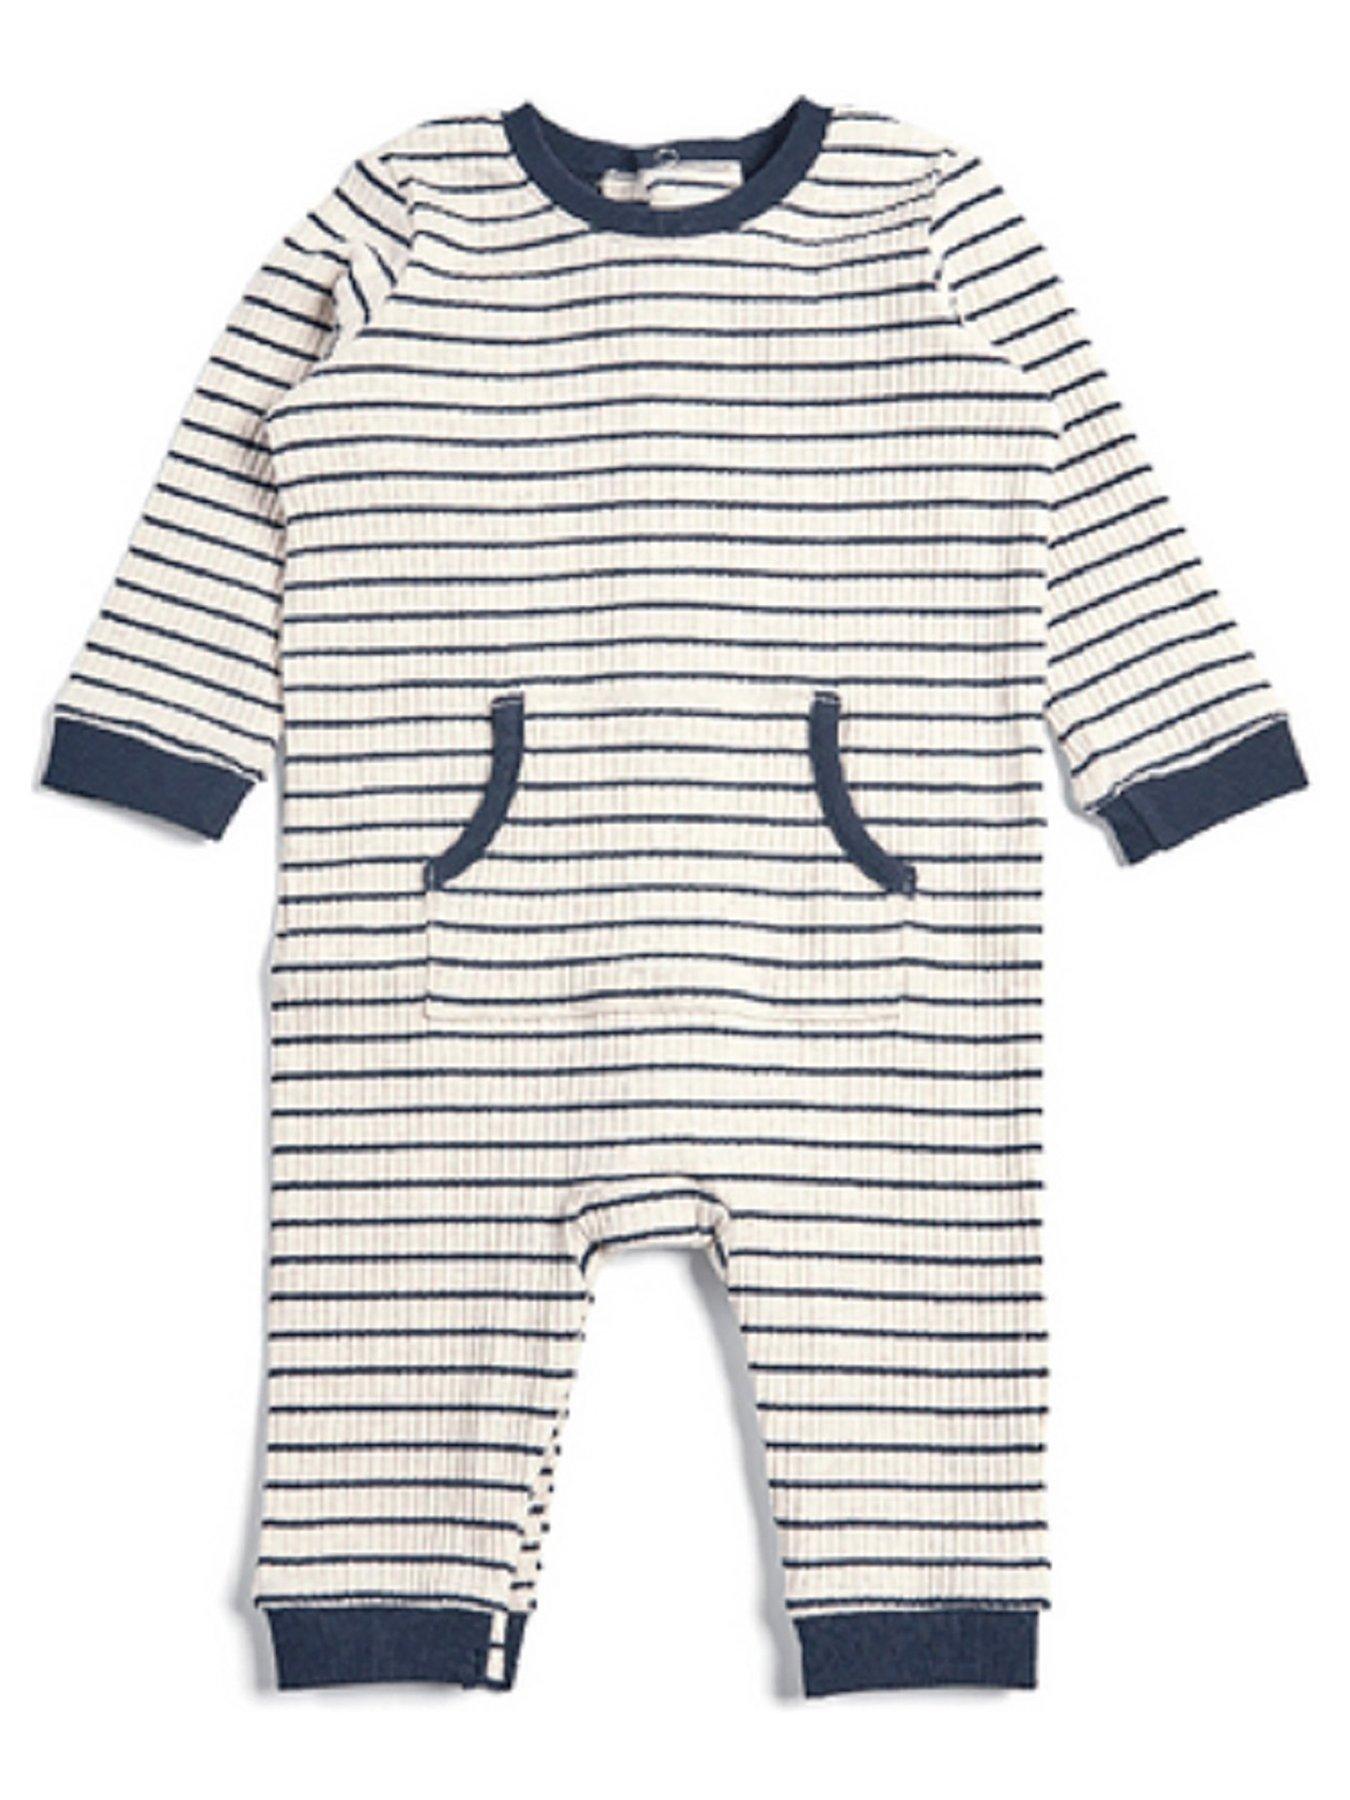 mamas and papas baby suit